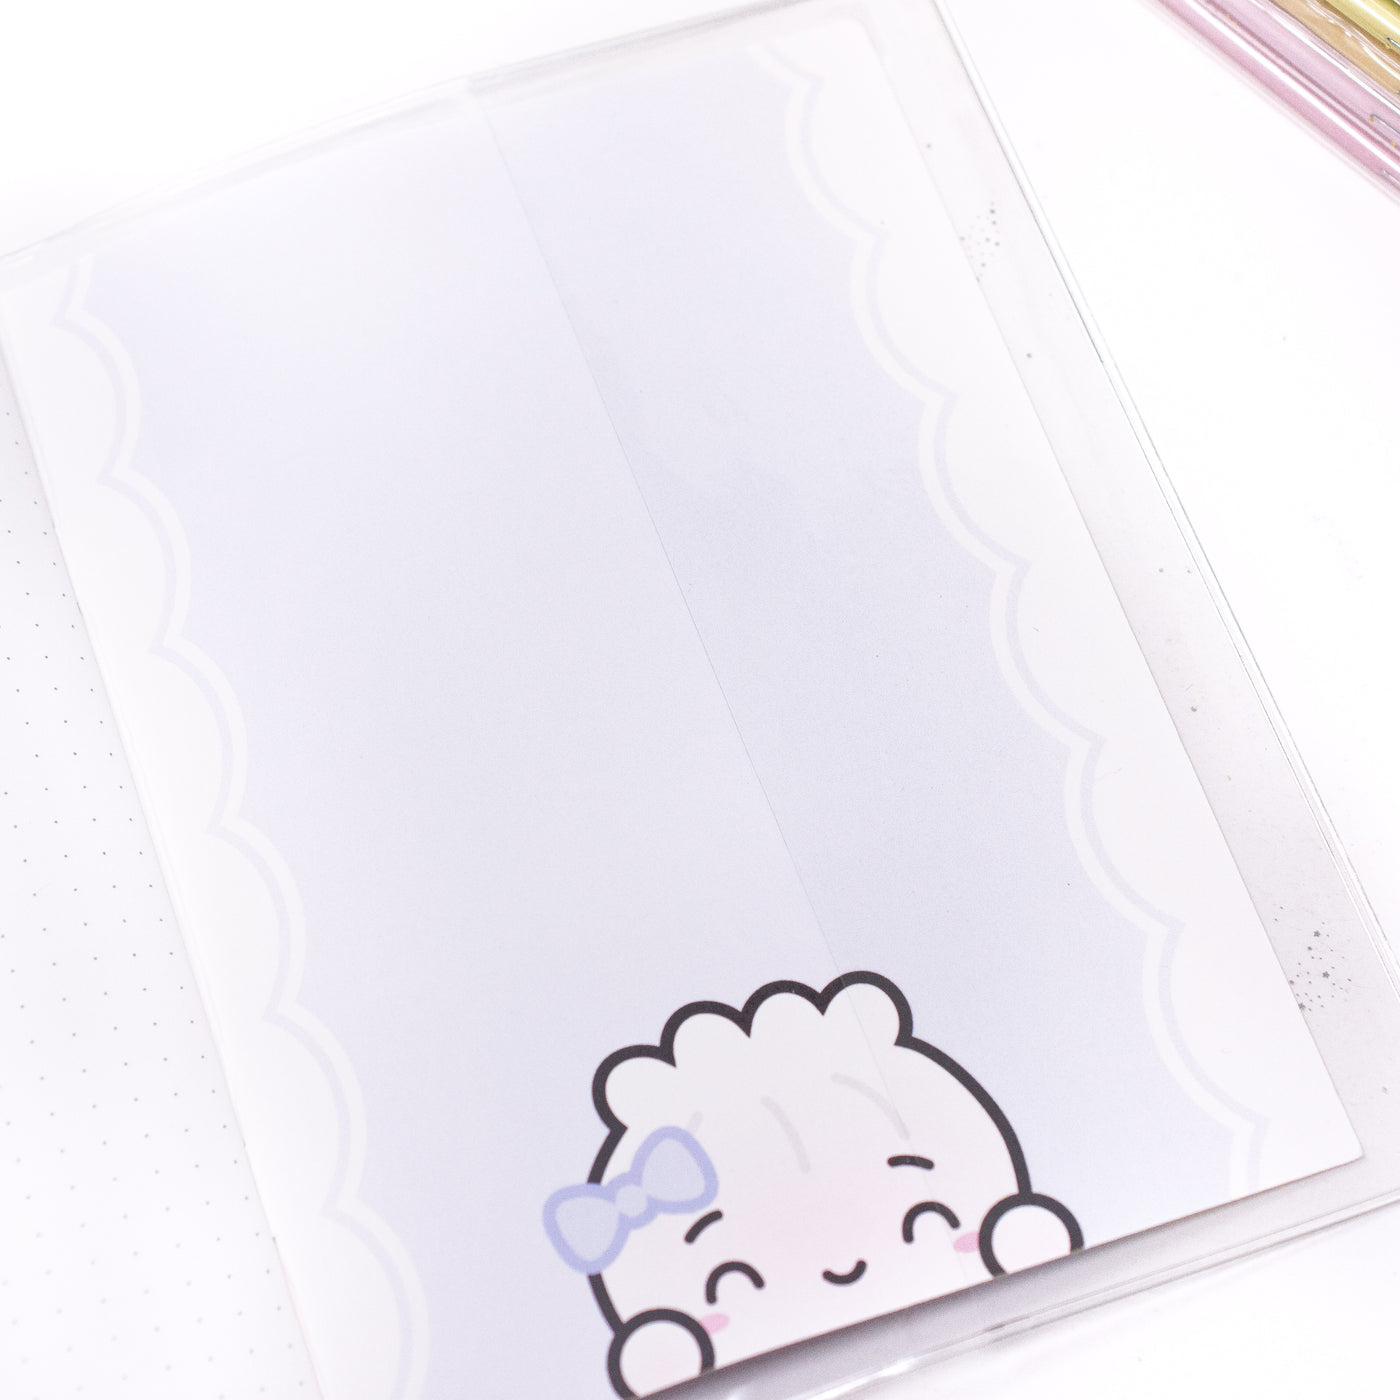 JCOVER003 | Clear Jelly Notebook Cover (B6 - Fits notebooks and undated monthly/weekly/daily planners)